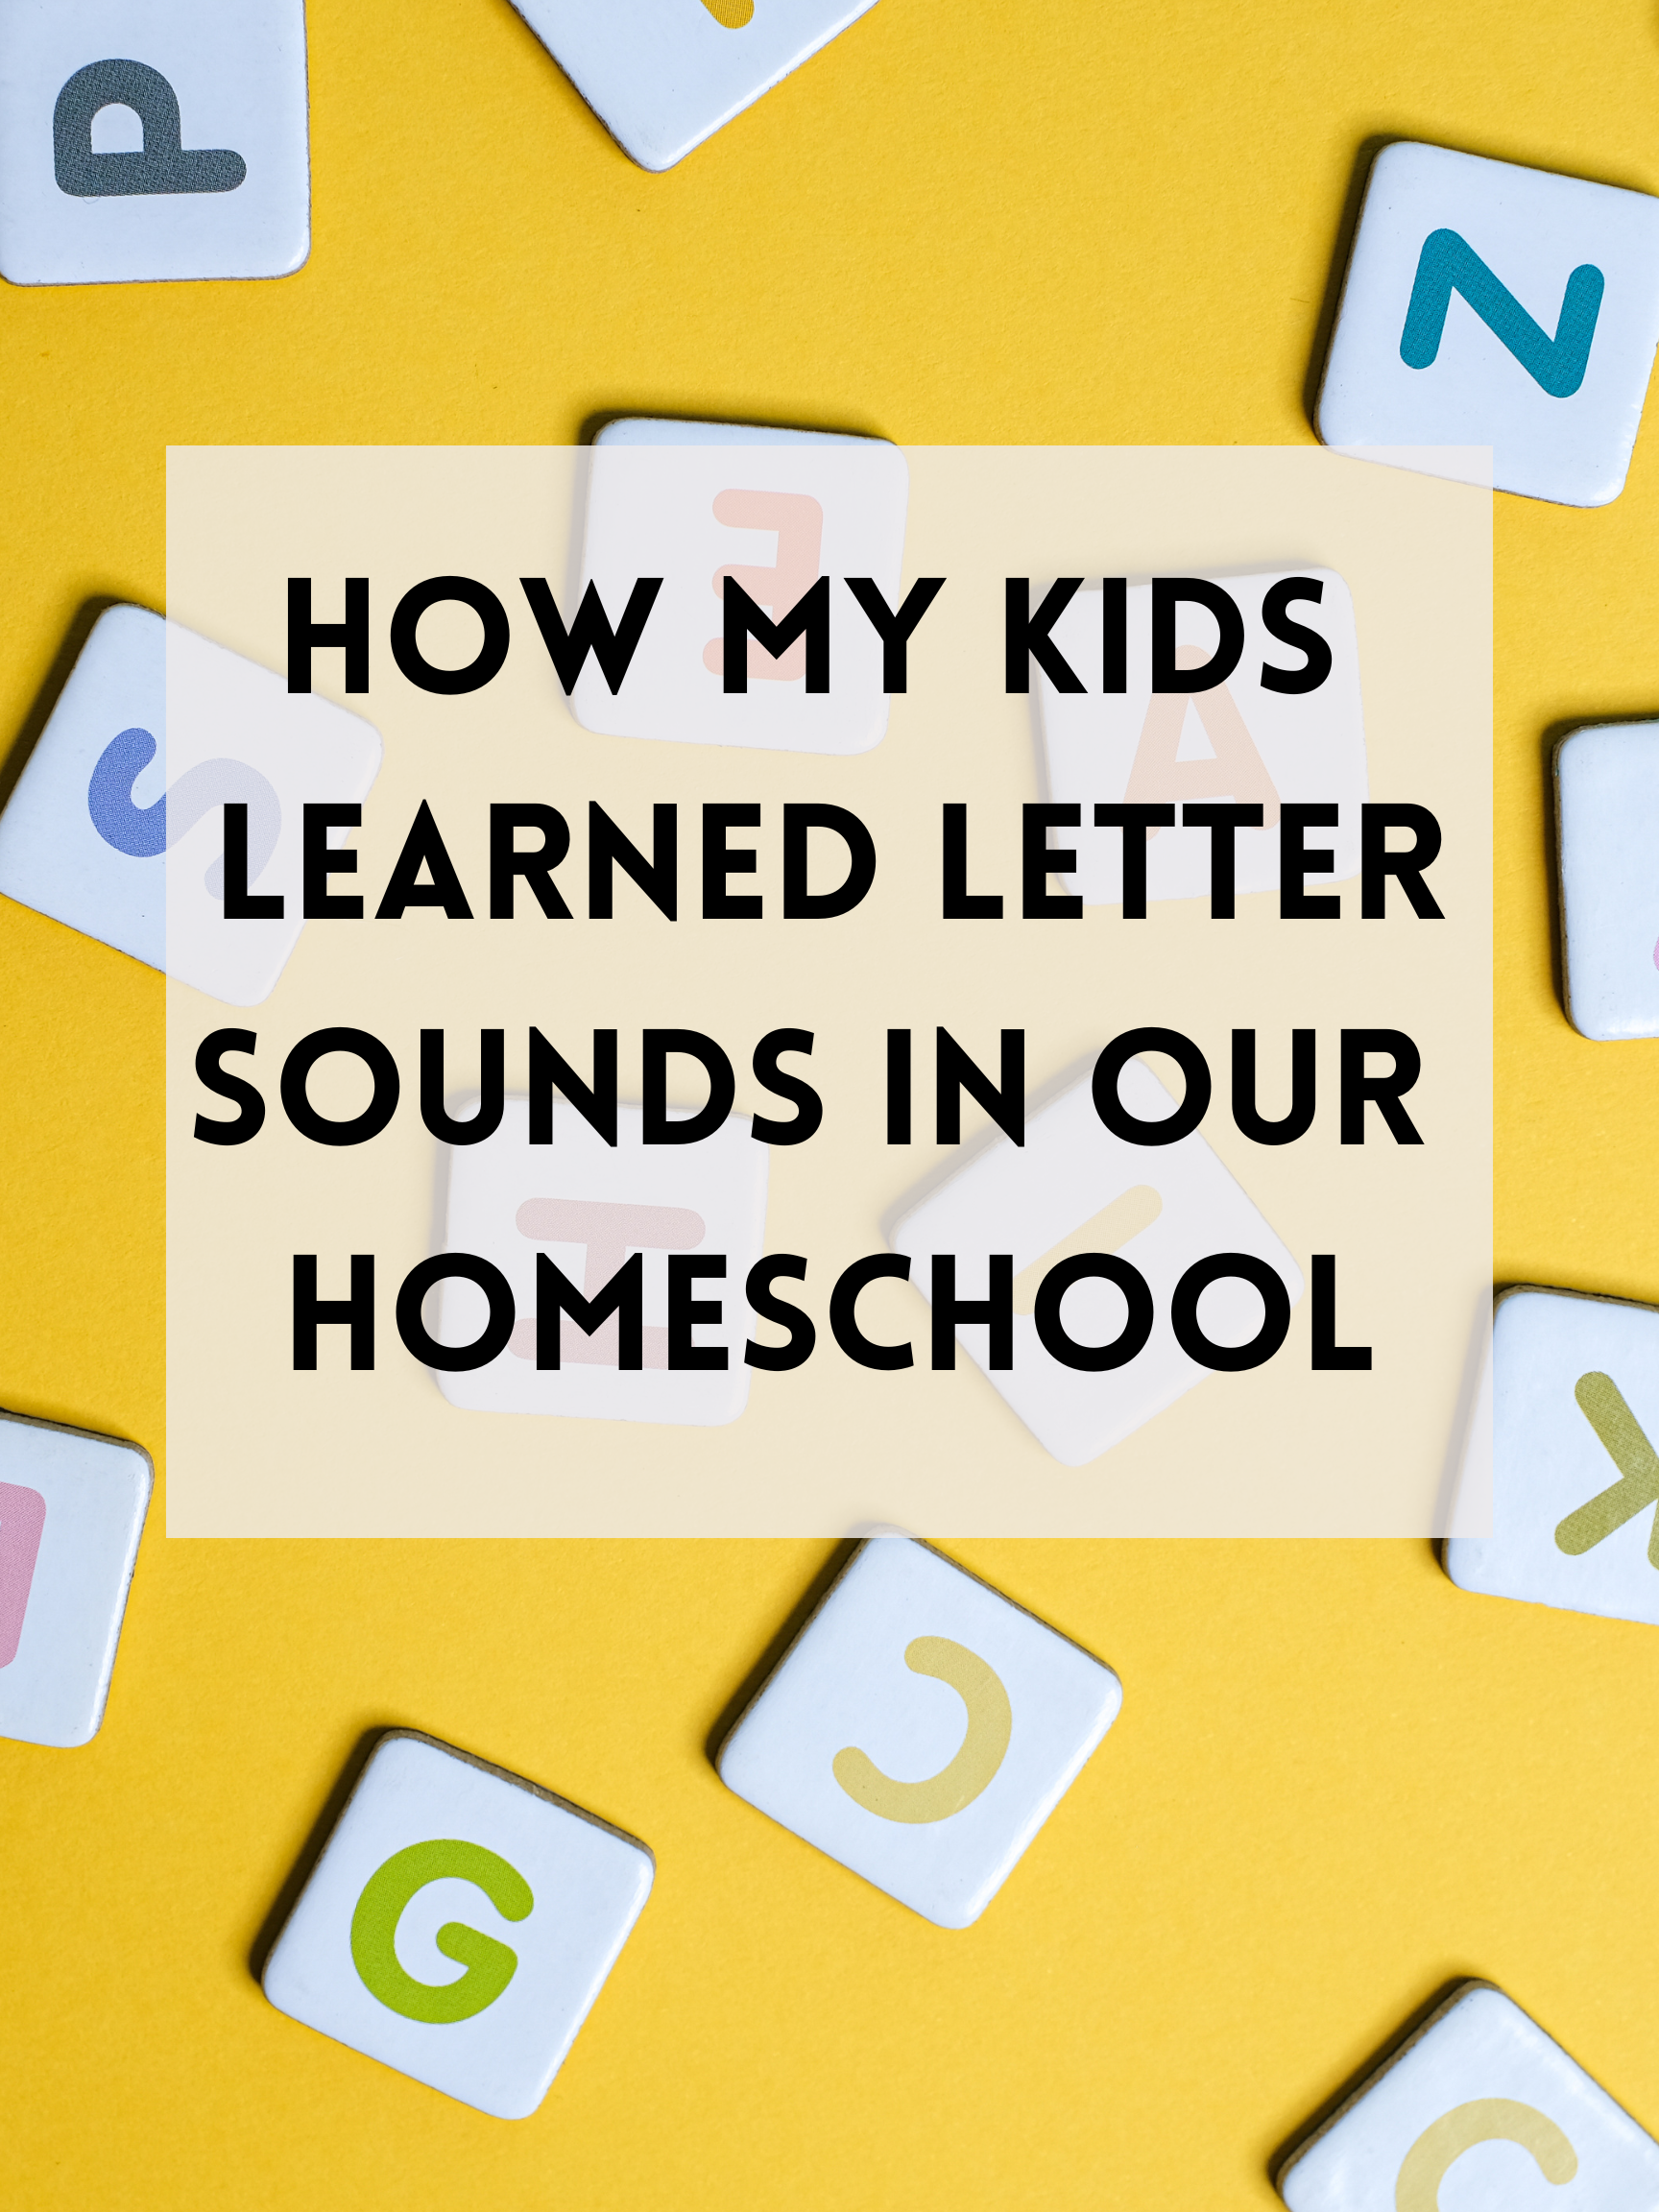 How We Learned Letter Sounds in Our Homeschool